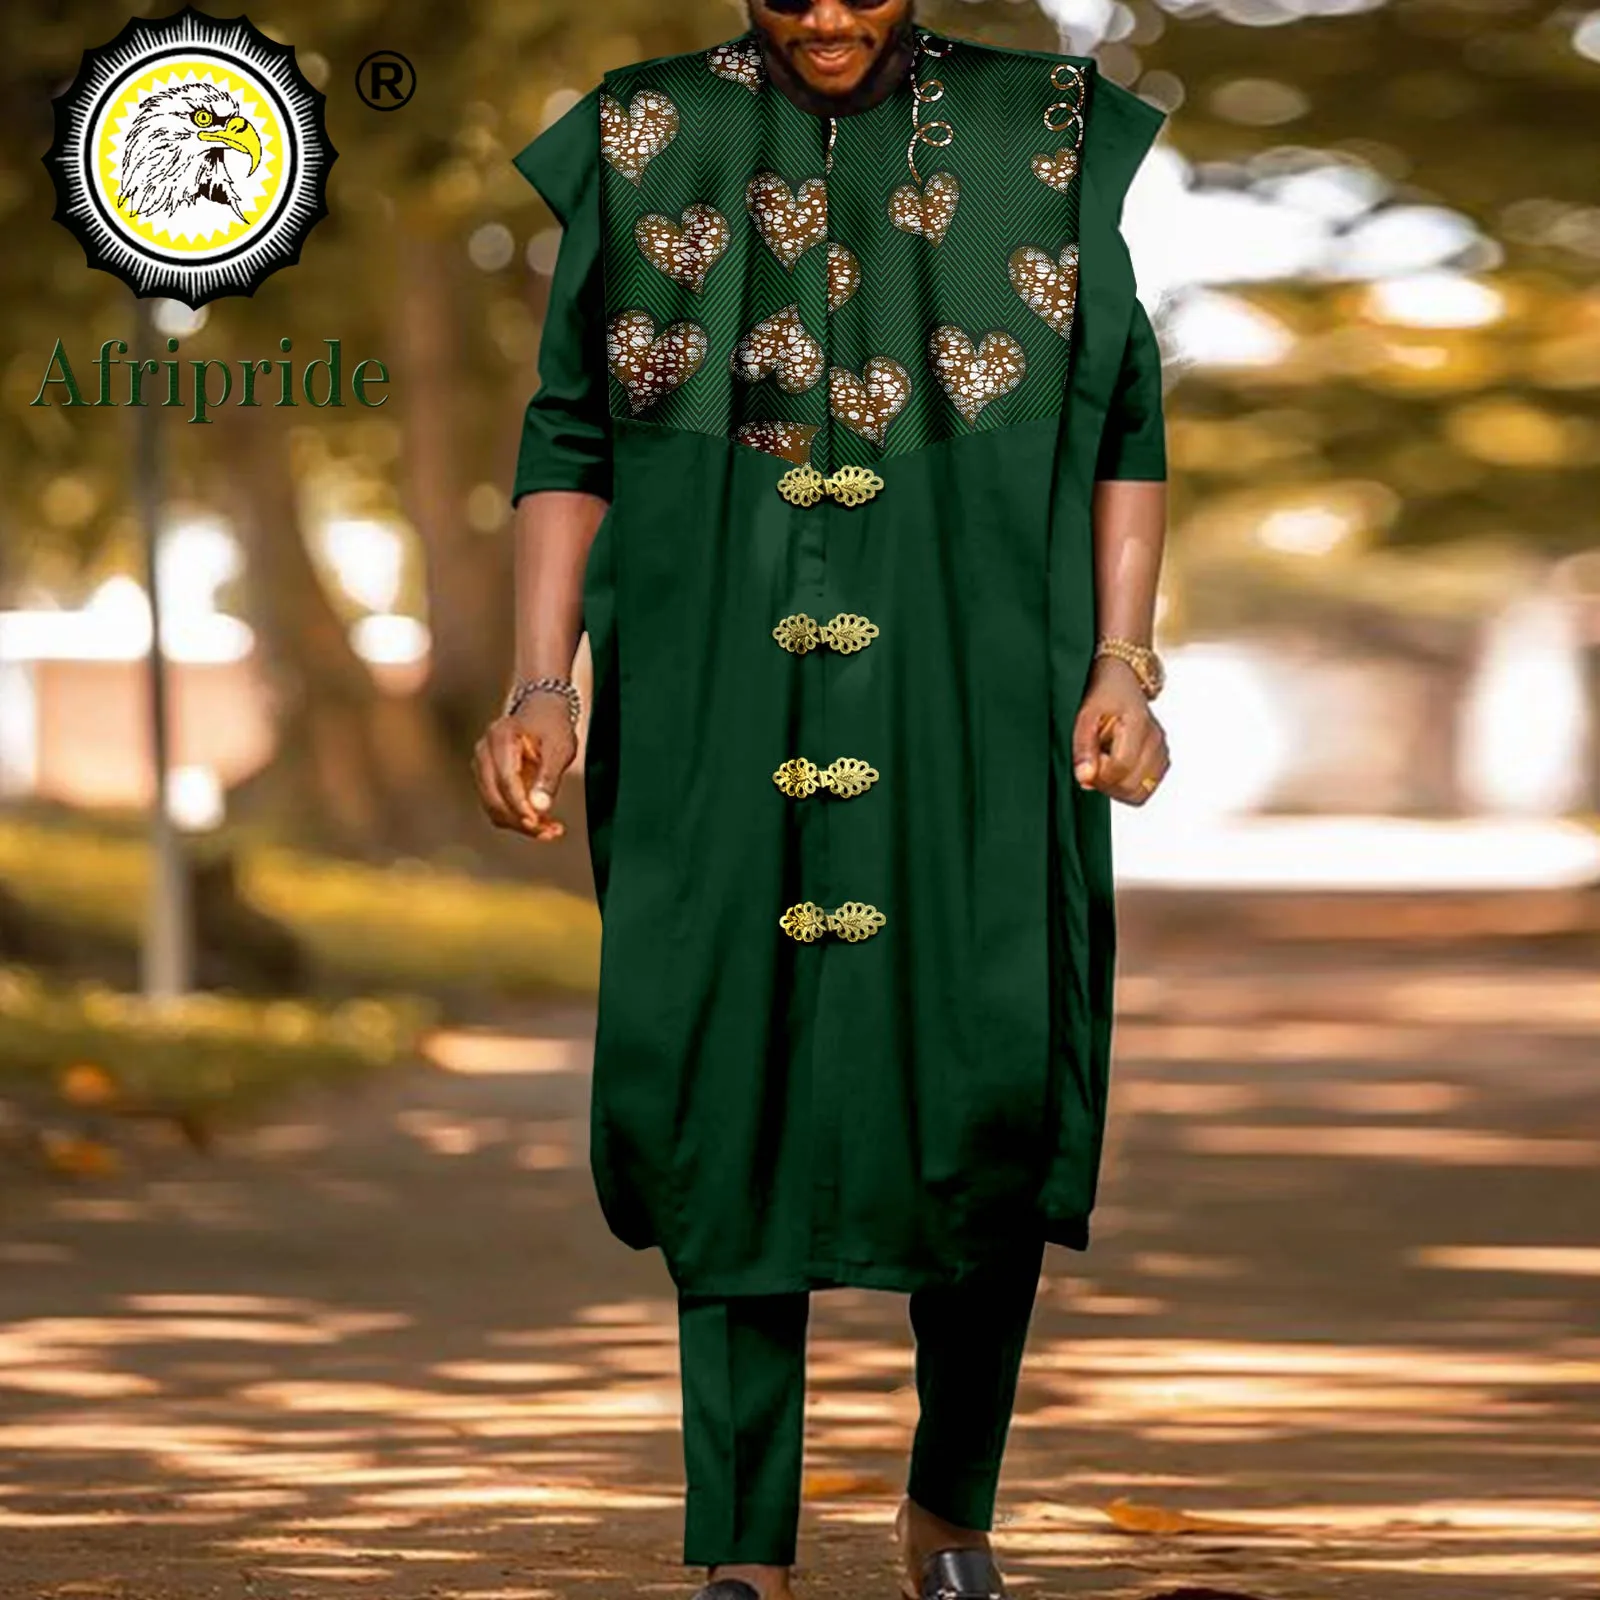 African Suit for Men Agbada Robe Dashiki Printed Shirts and Pants 3 Piece Set Kaftan Outfits Bazin Riche Formal Clothes A2216014